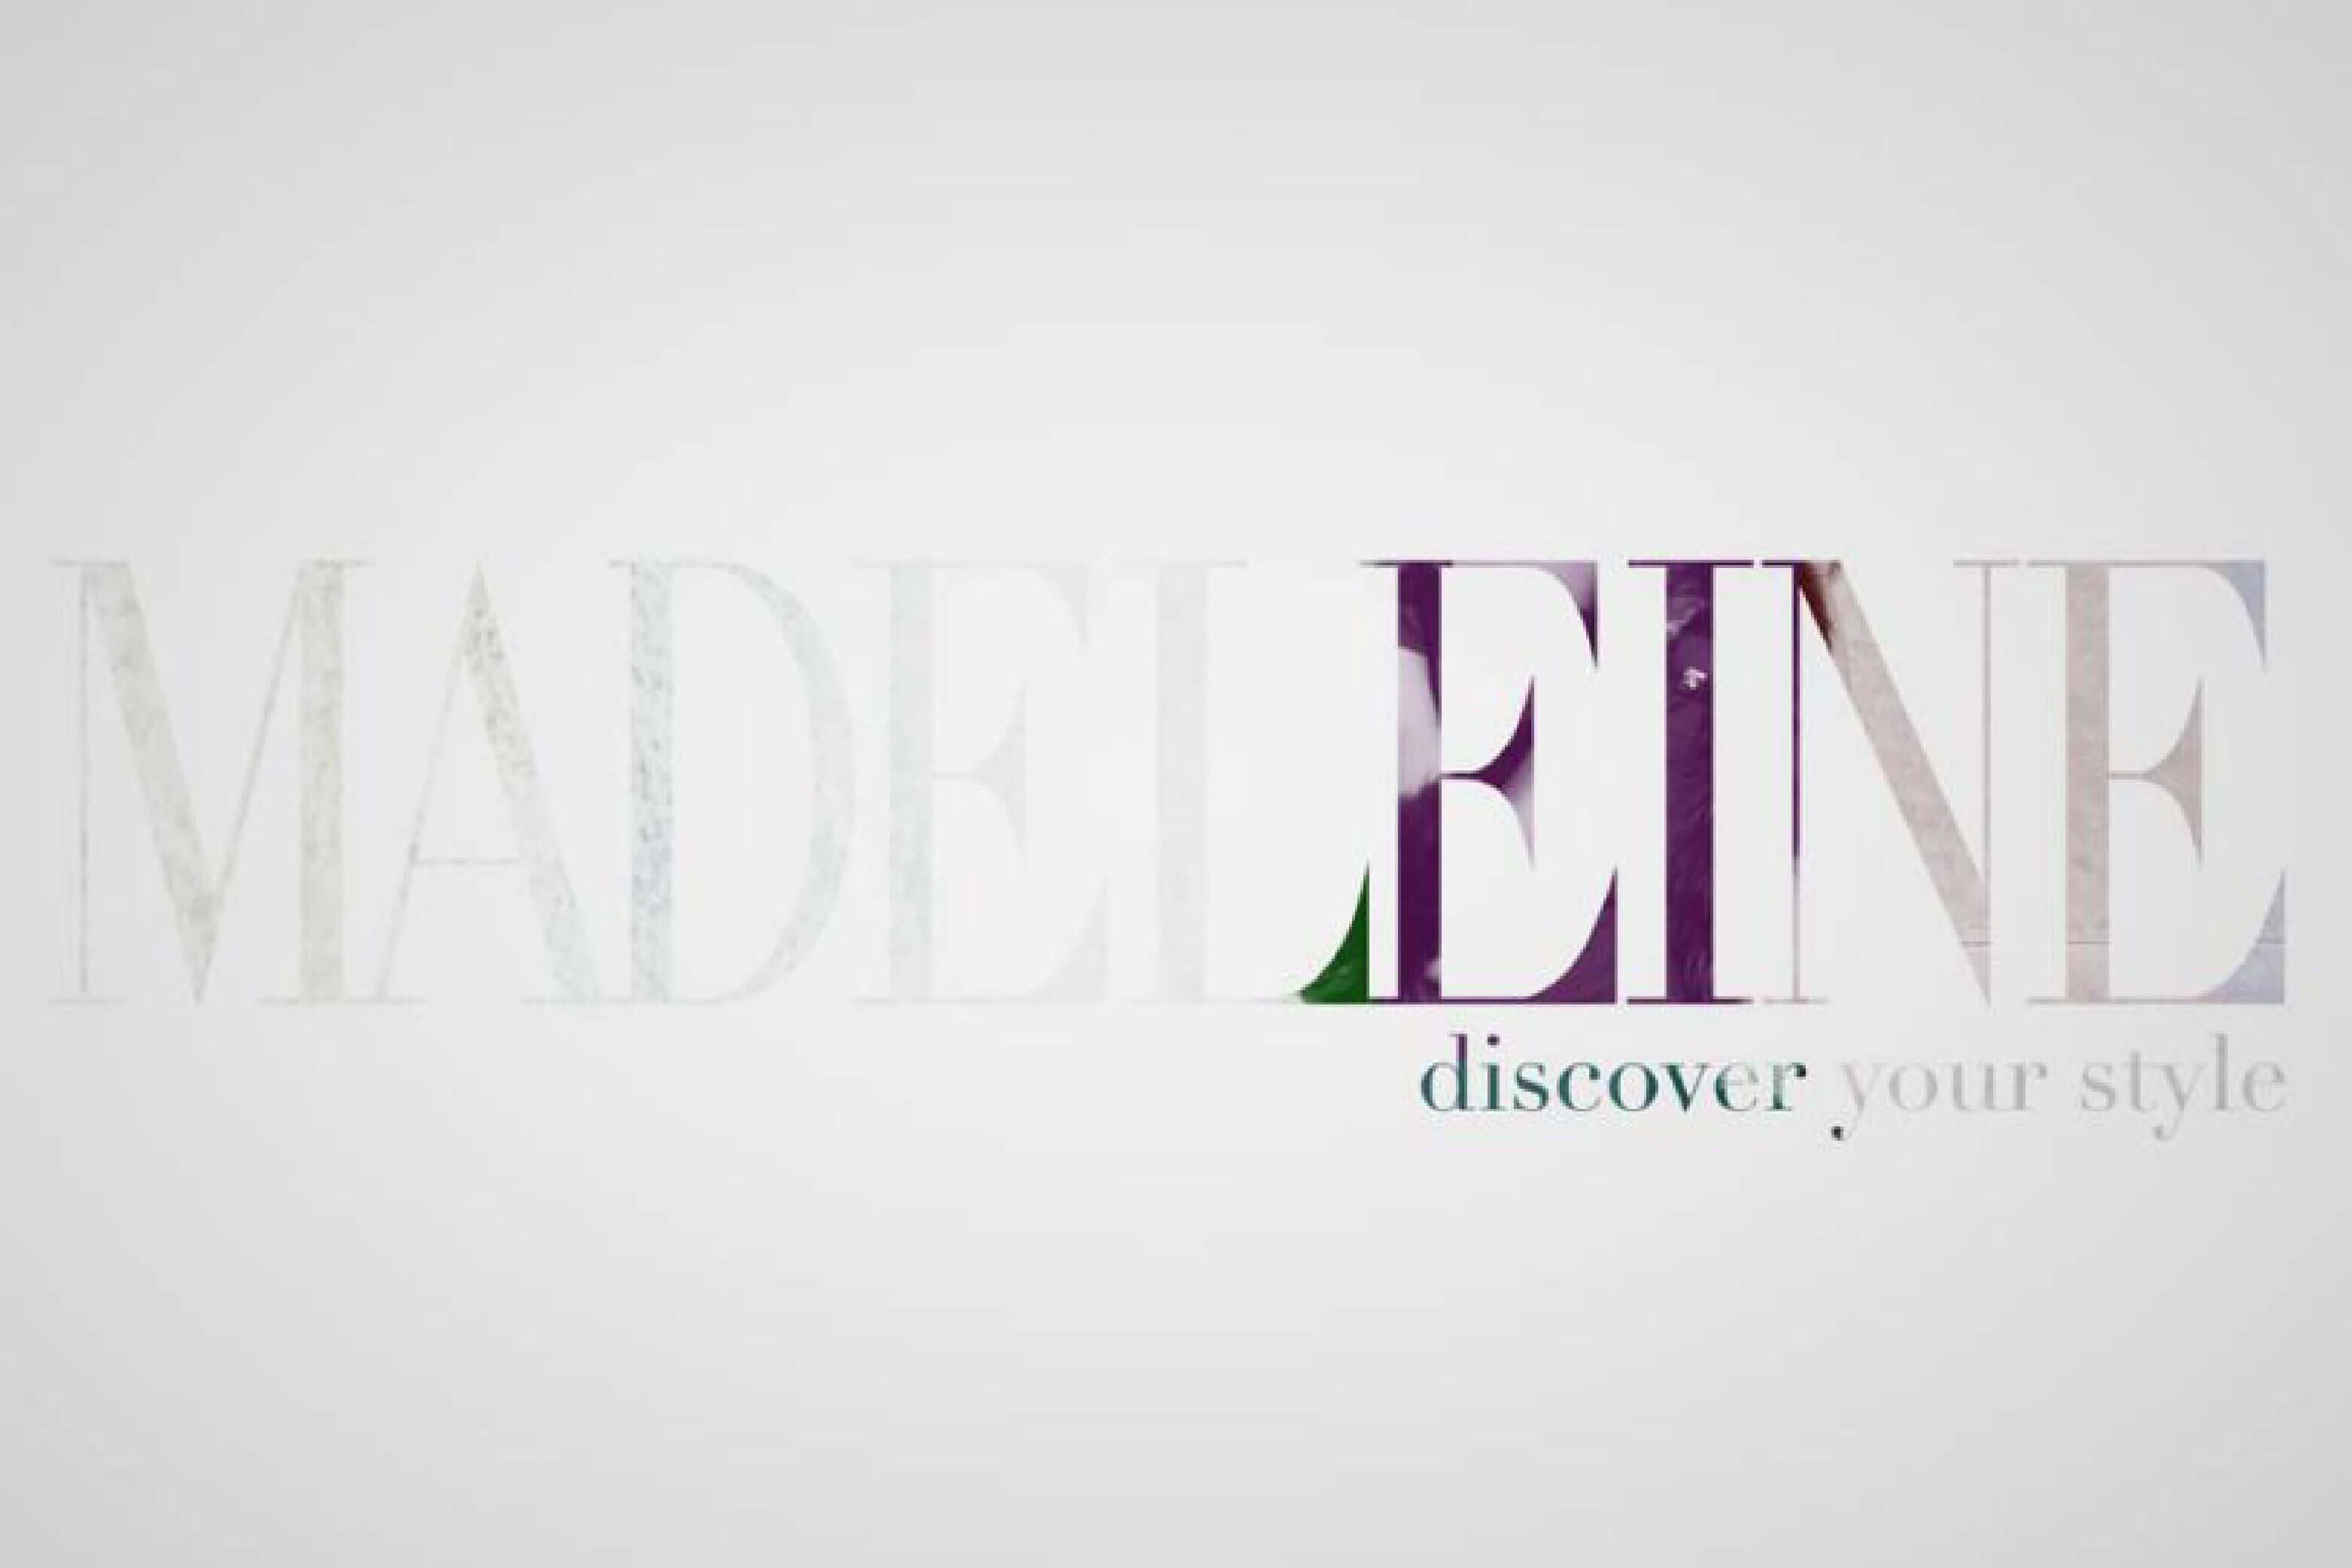 Madeleine - Discover your style